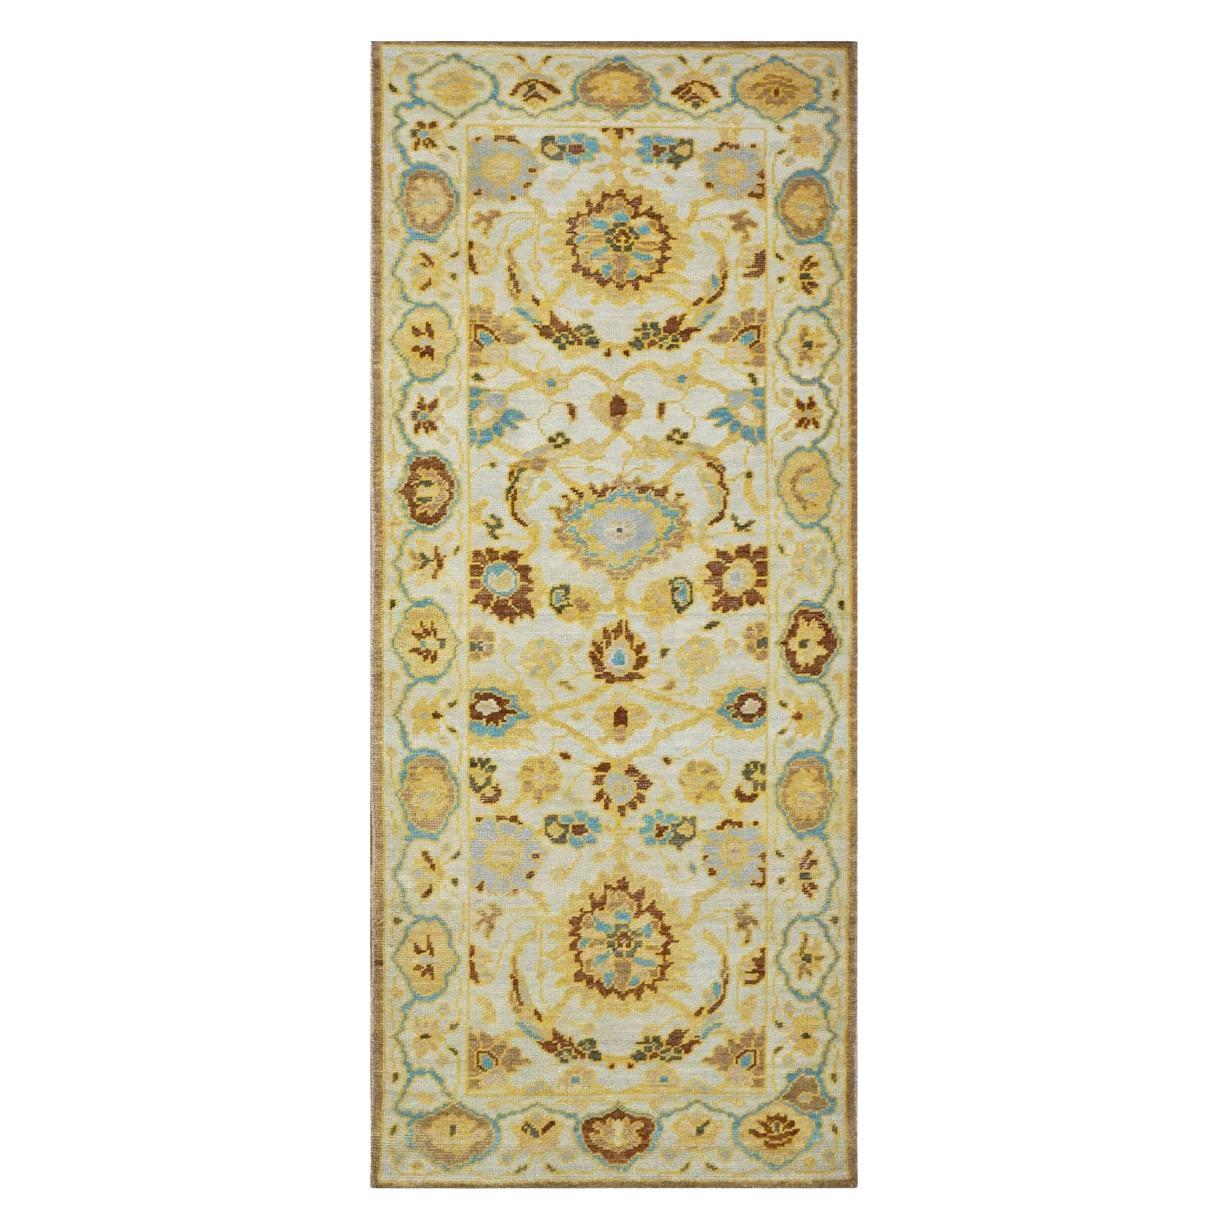 21st Century Sultanabad Masters 3x6 Ivory, Gold, & Teal Wool Hall Runner